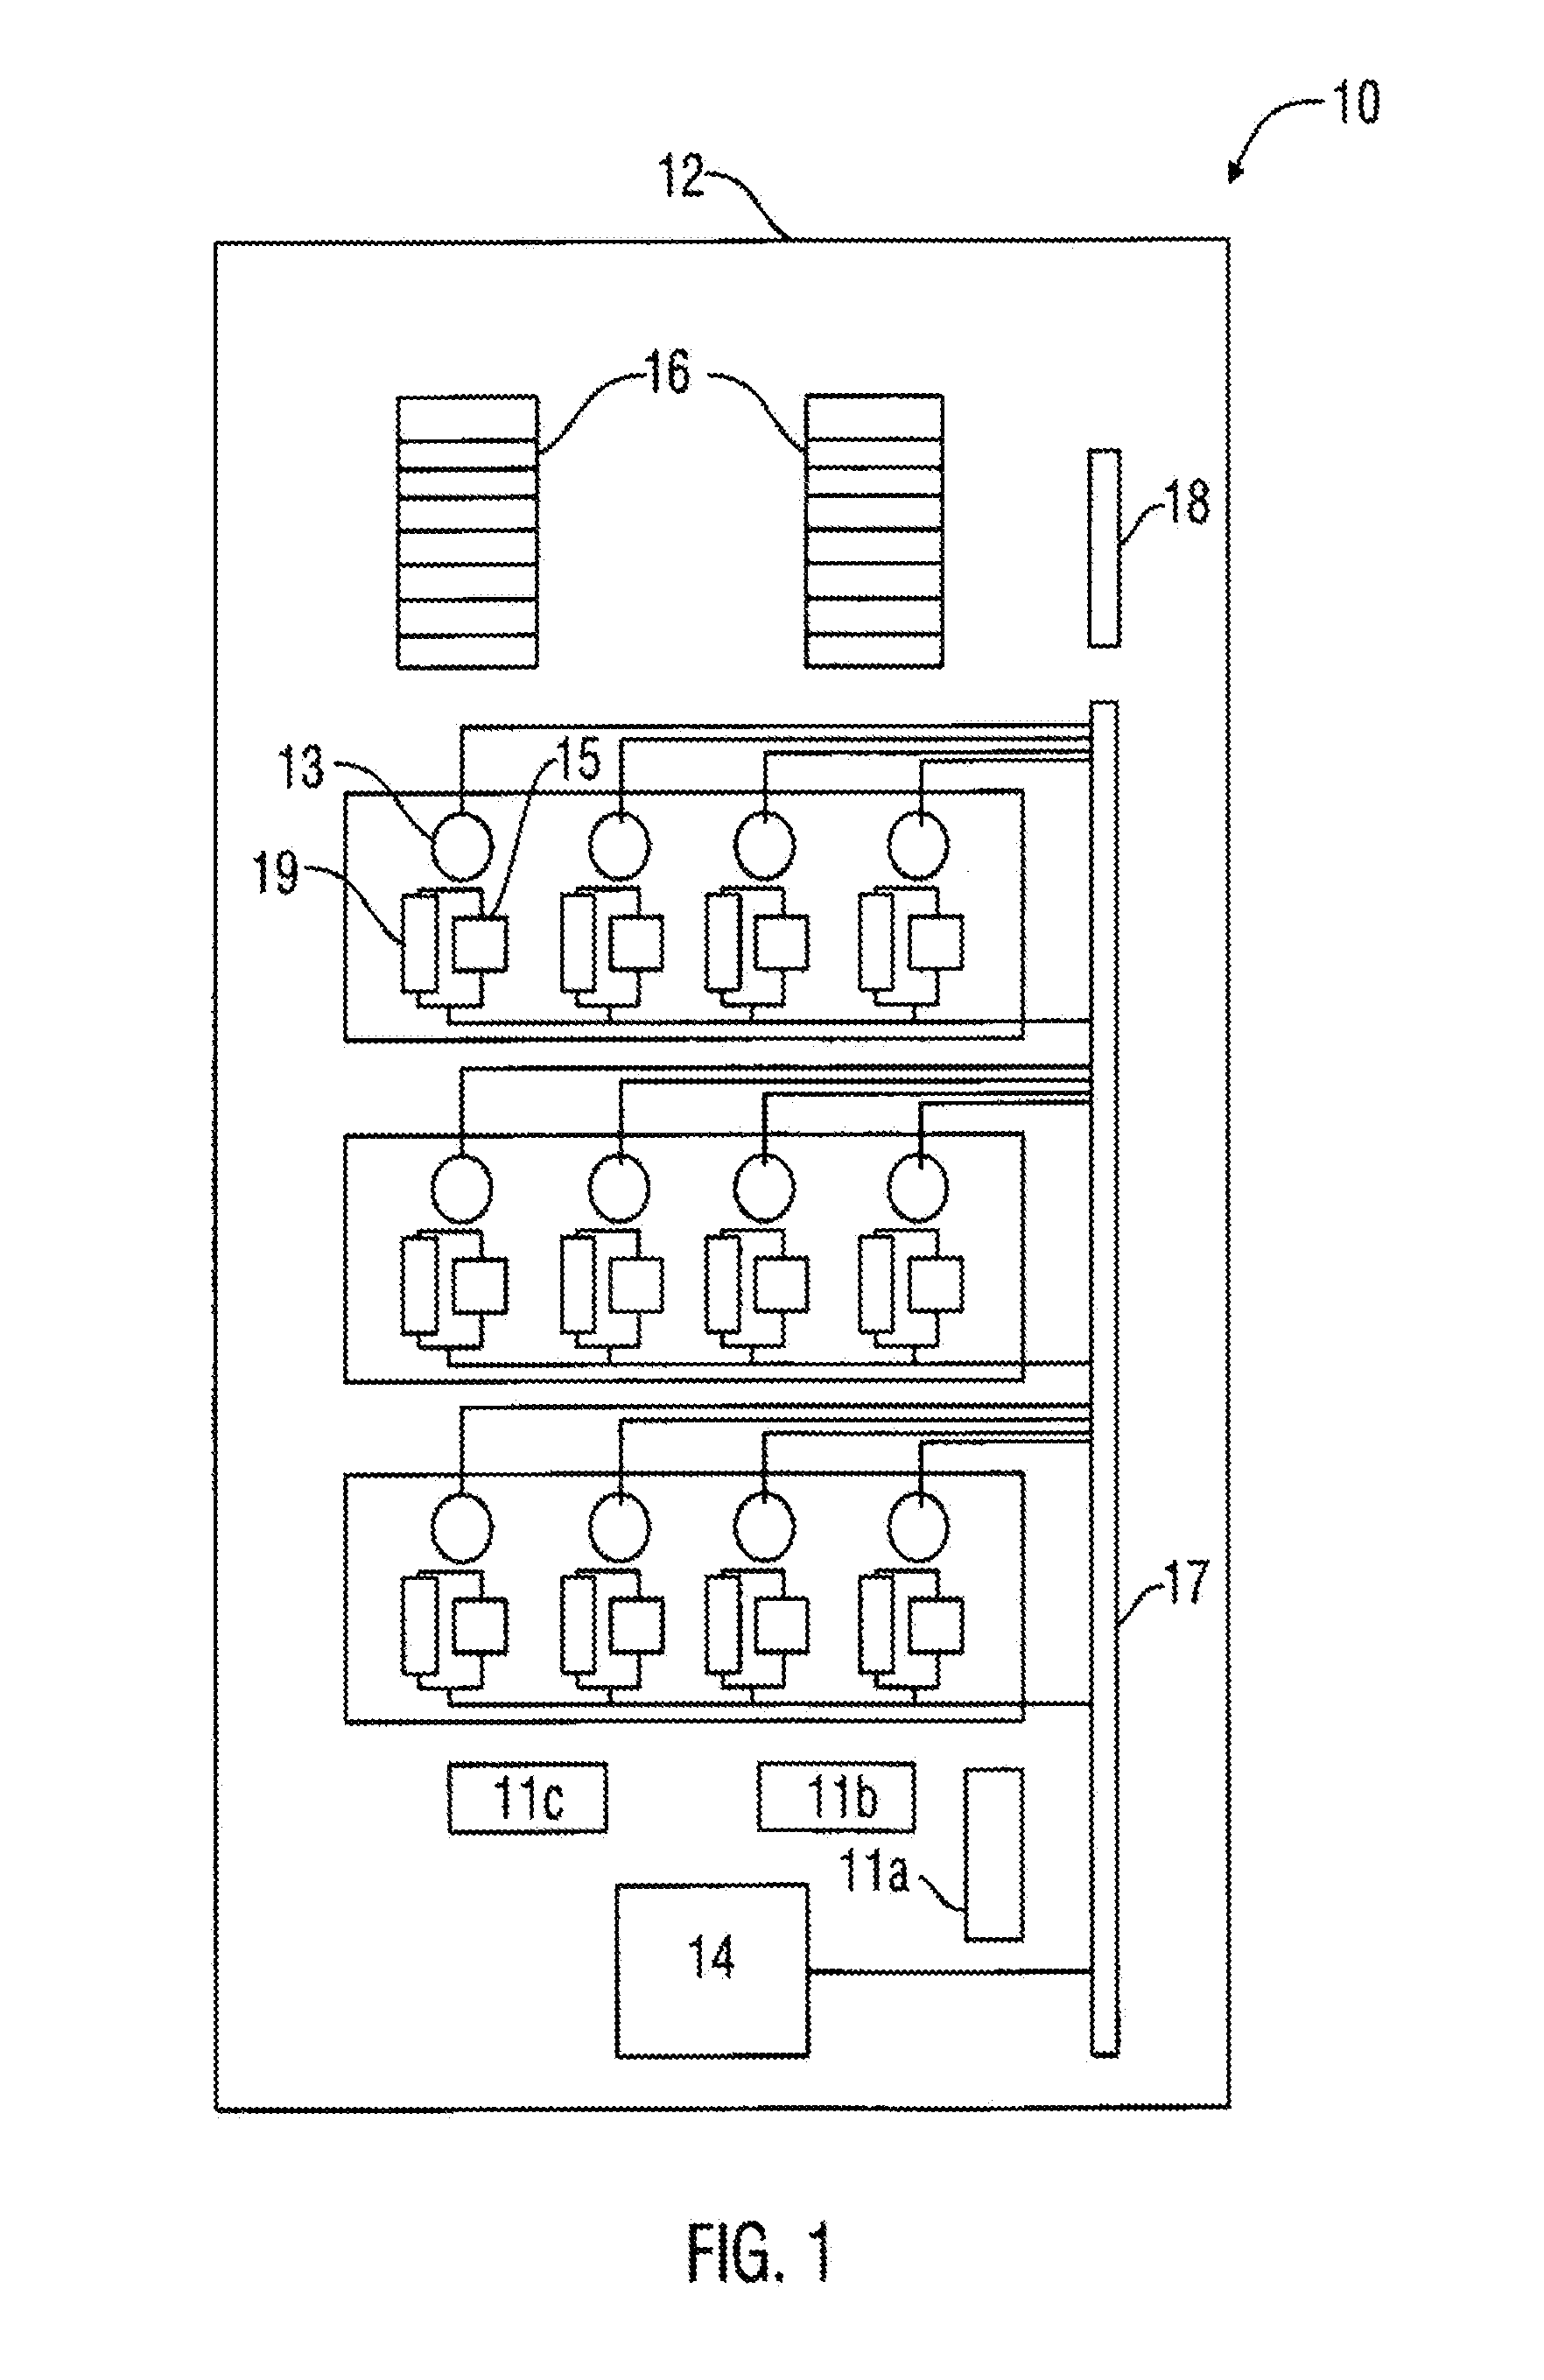 Apparatus and method for protecting an uninterruptible power supply and critical loads connected thereto